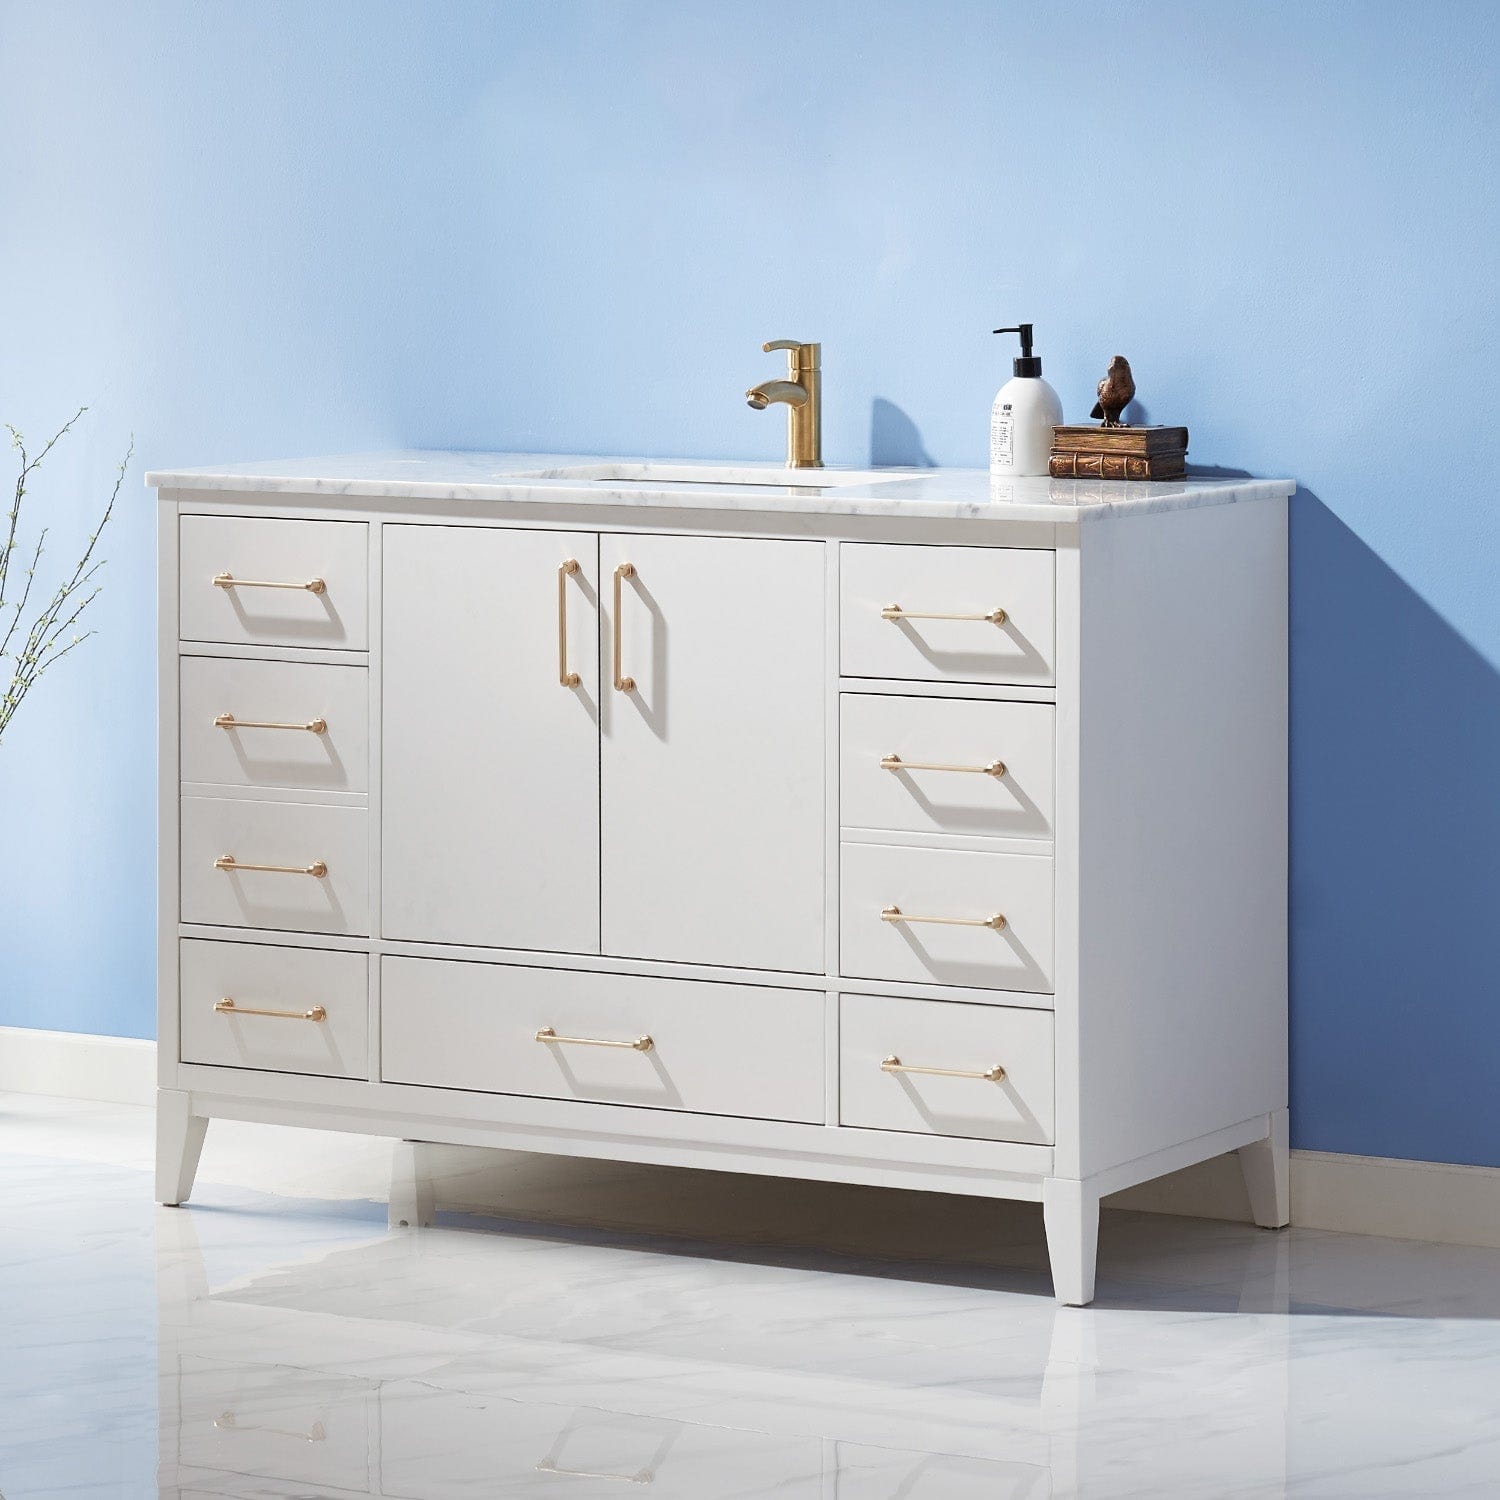 Altair Sutton 48" Single Bathroom Vanity Set in White and Carrara White Marble Countertop without Mirror 541048-WH-CA-NM - Molaix631112971928Vanity541048-WH-CA-NM